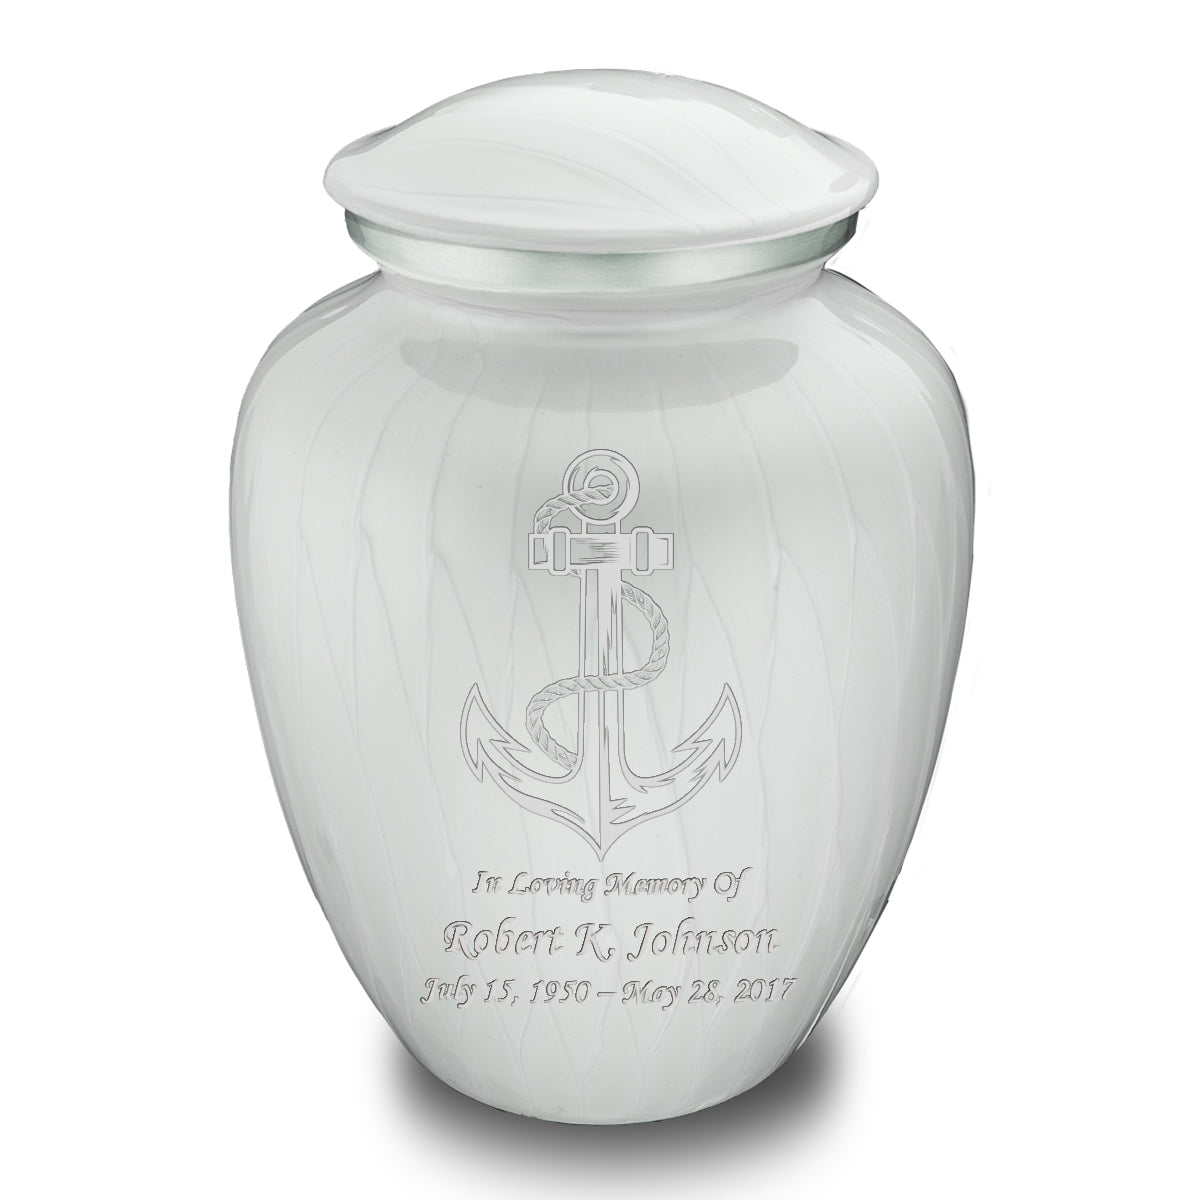 Adult Embrace Pearl White Anchor Cremation Urn